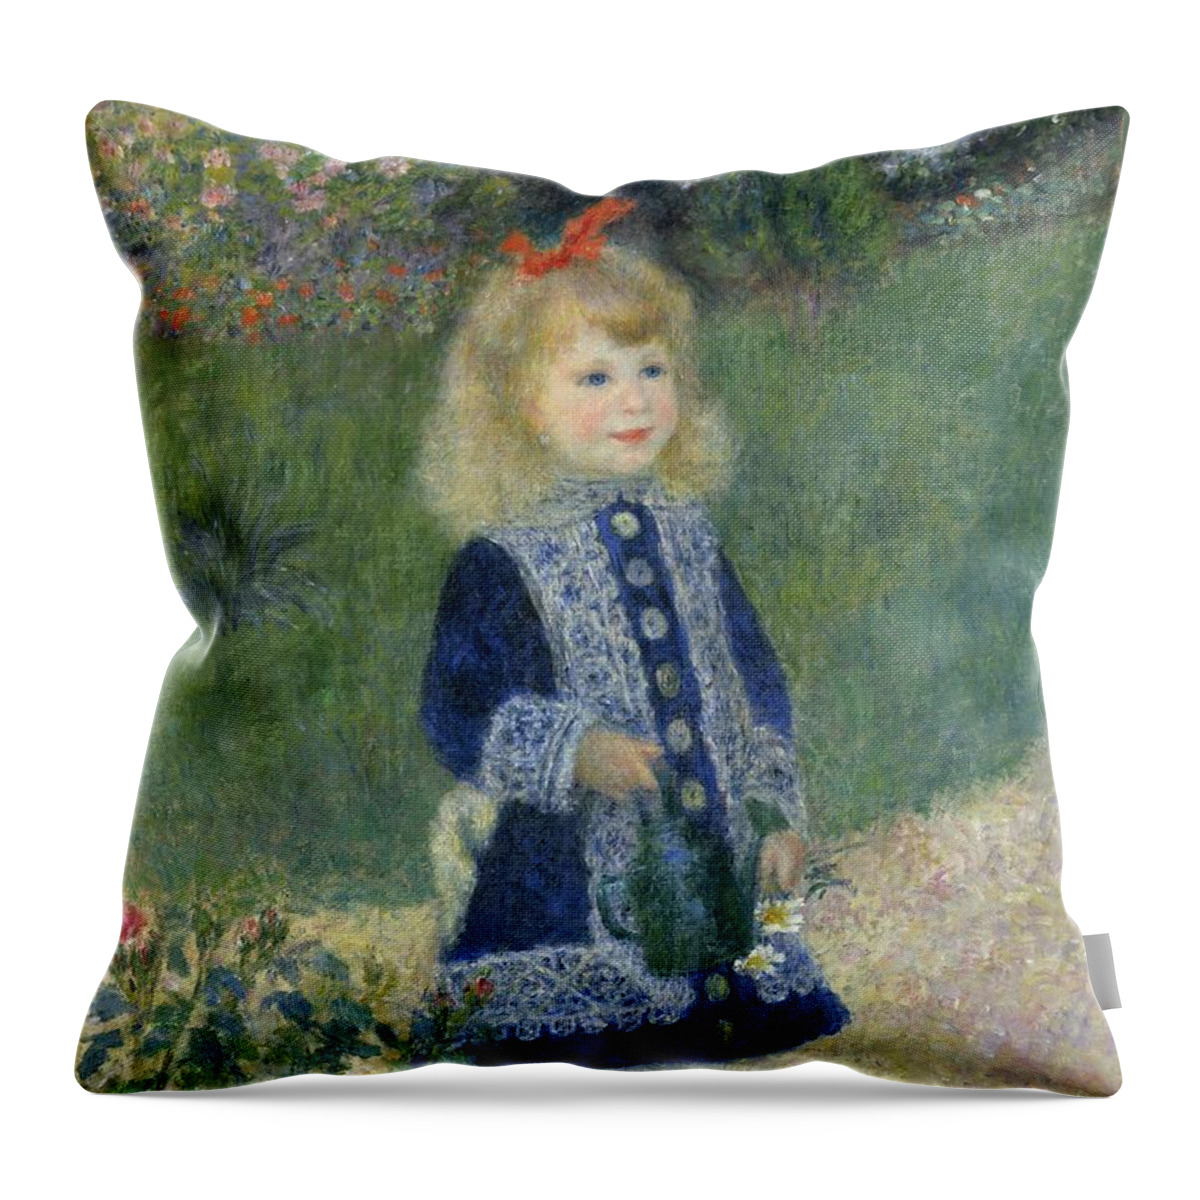 Auguste Renoir Throw Pillow featuring the painting Girl With A Watering Can by Auguste Renoir